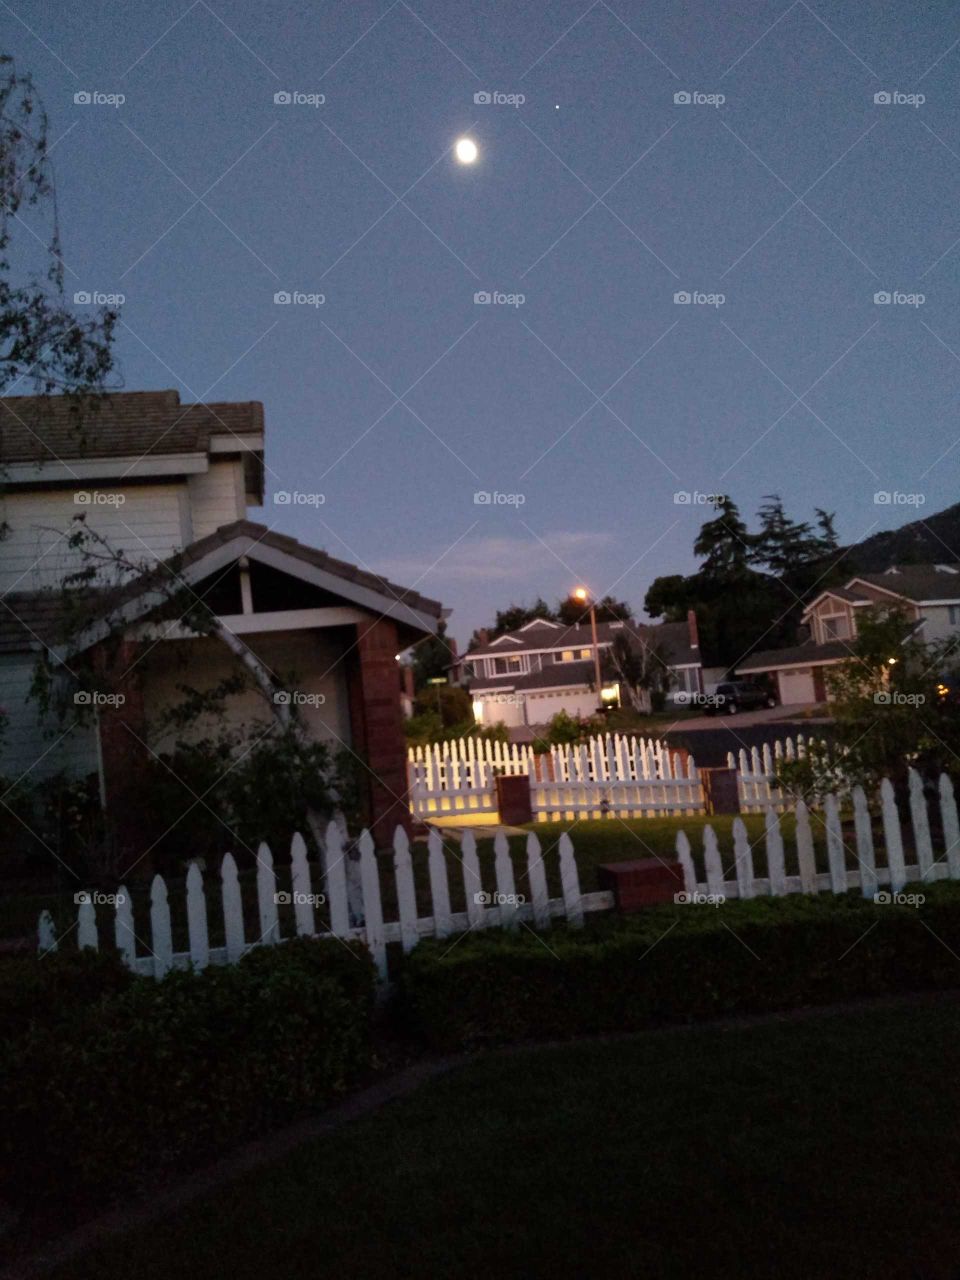 The main reason for this picture was to capture a day Moon and it also just captured a beautiful scenery Temecula California. 😊